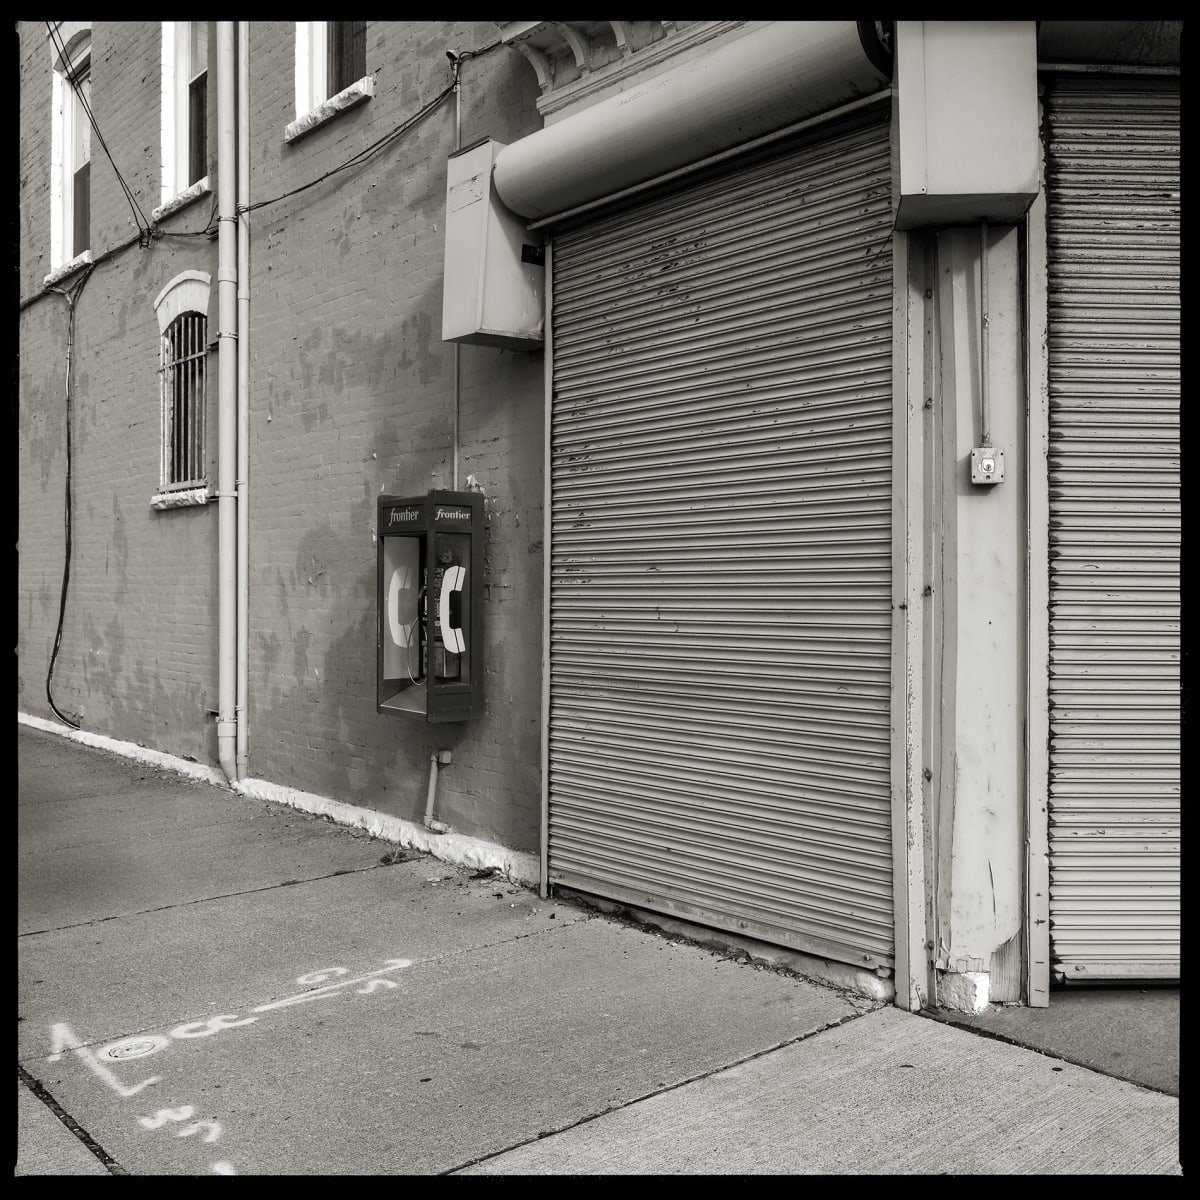 585.254.9463 – Aladdin’s Communications, 1108 Lyell Avenue, Rochester, NY 14606 by Eric T. Kunsman  Image: ID: A black and white image shows a building that is partially shut up with a garage-like door. To the left of this door is a payphone mounted to the brick wall.  There are windows to the left of the payphone.